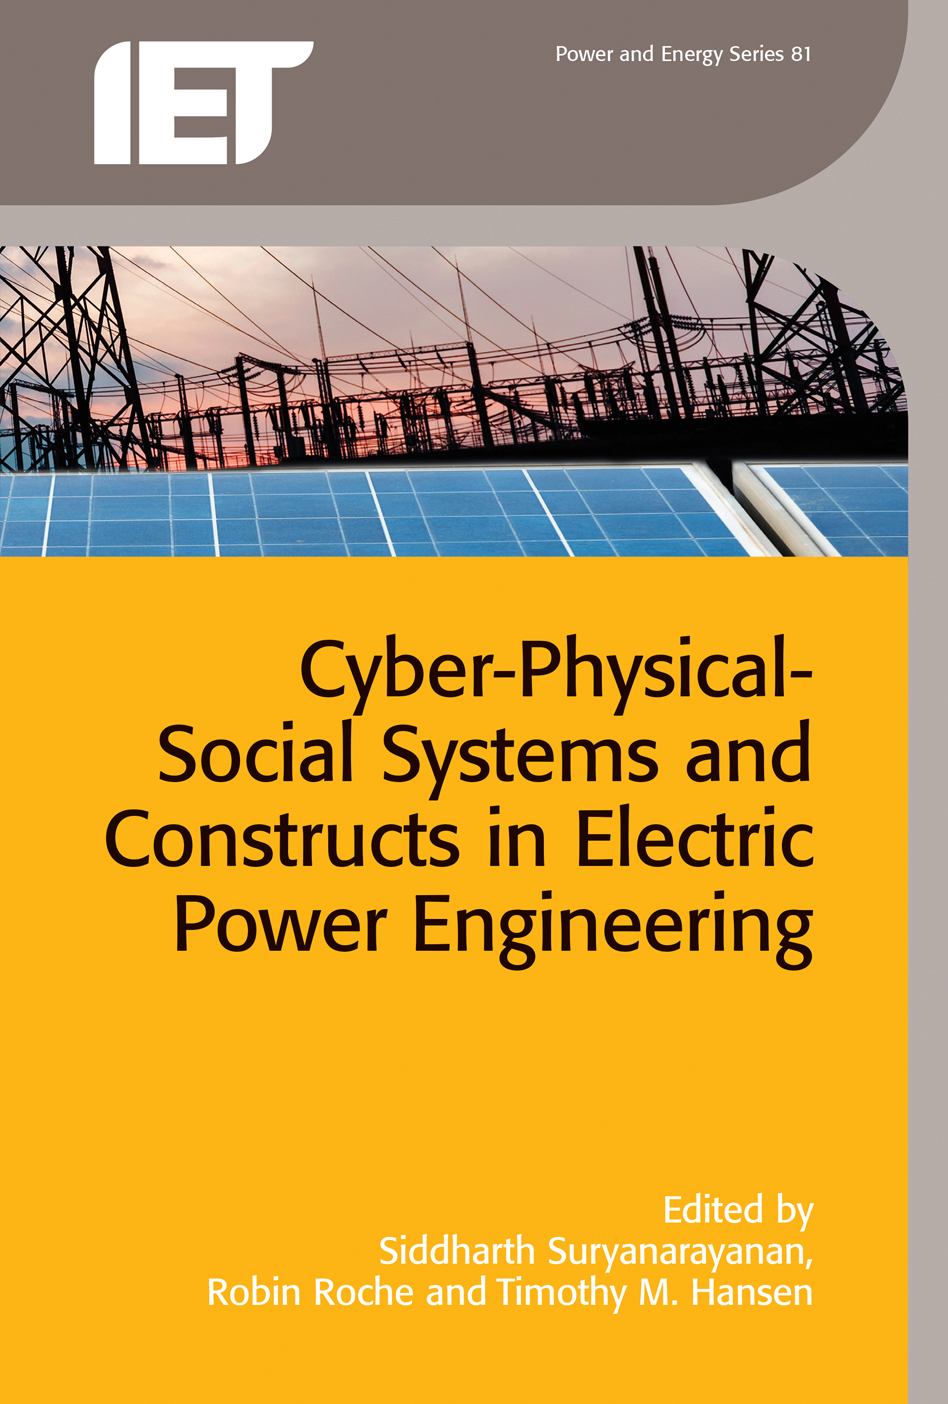 Cyber-Physical-Social Systems and Constructs in Electric Power Engineering